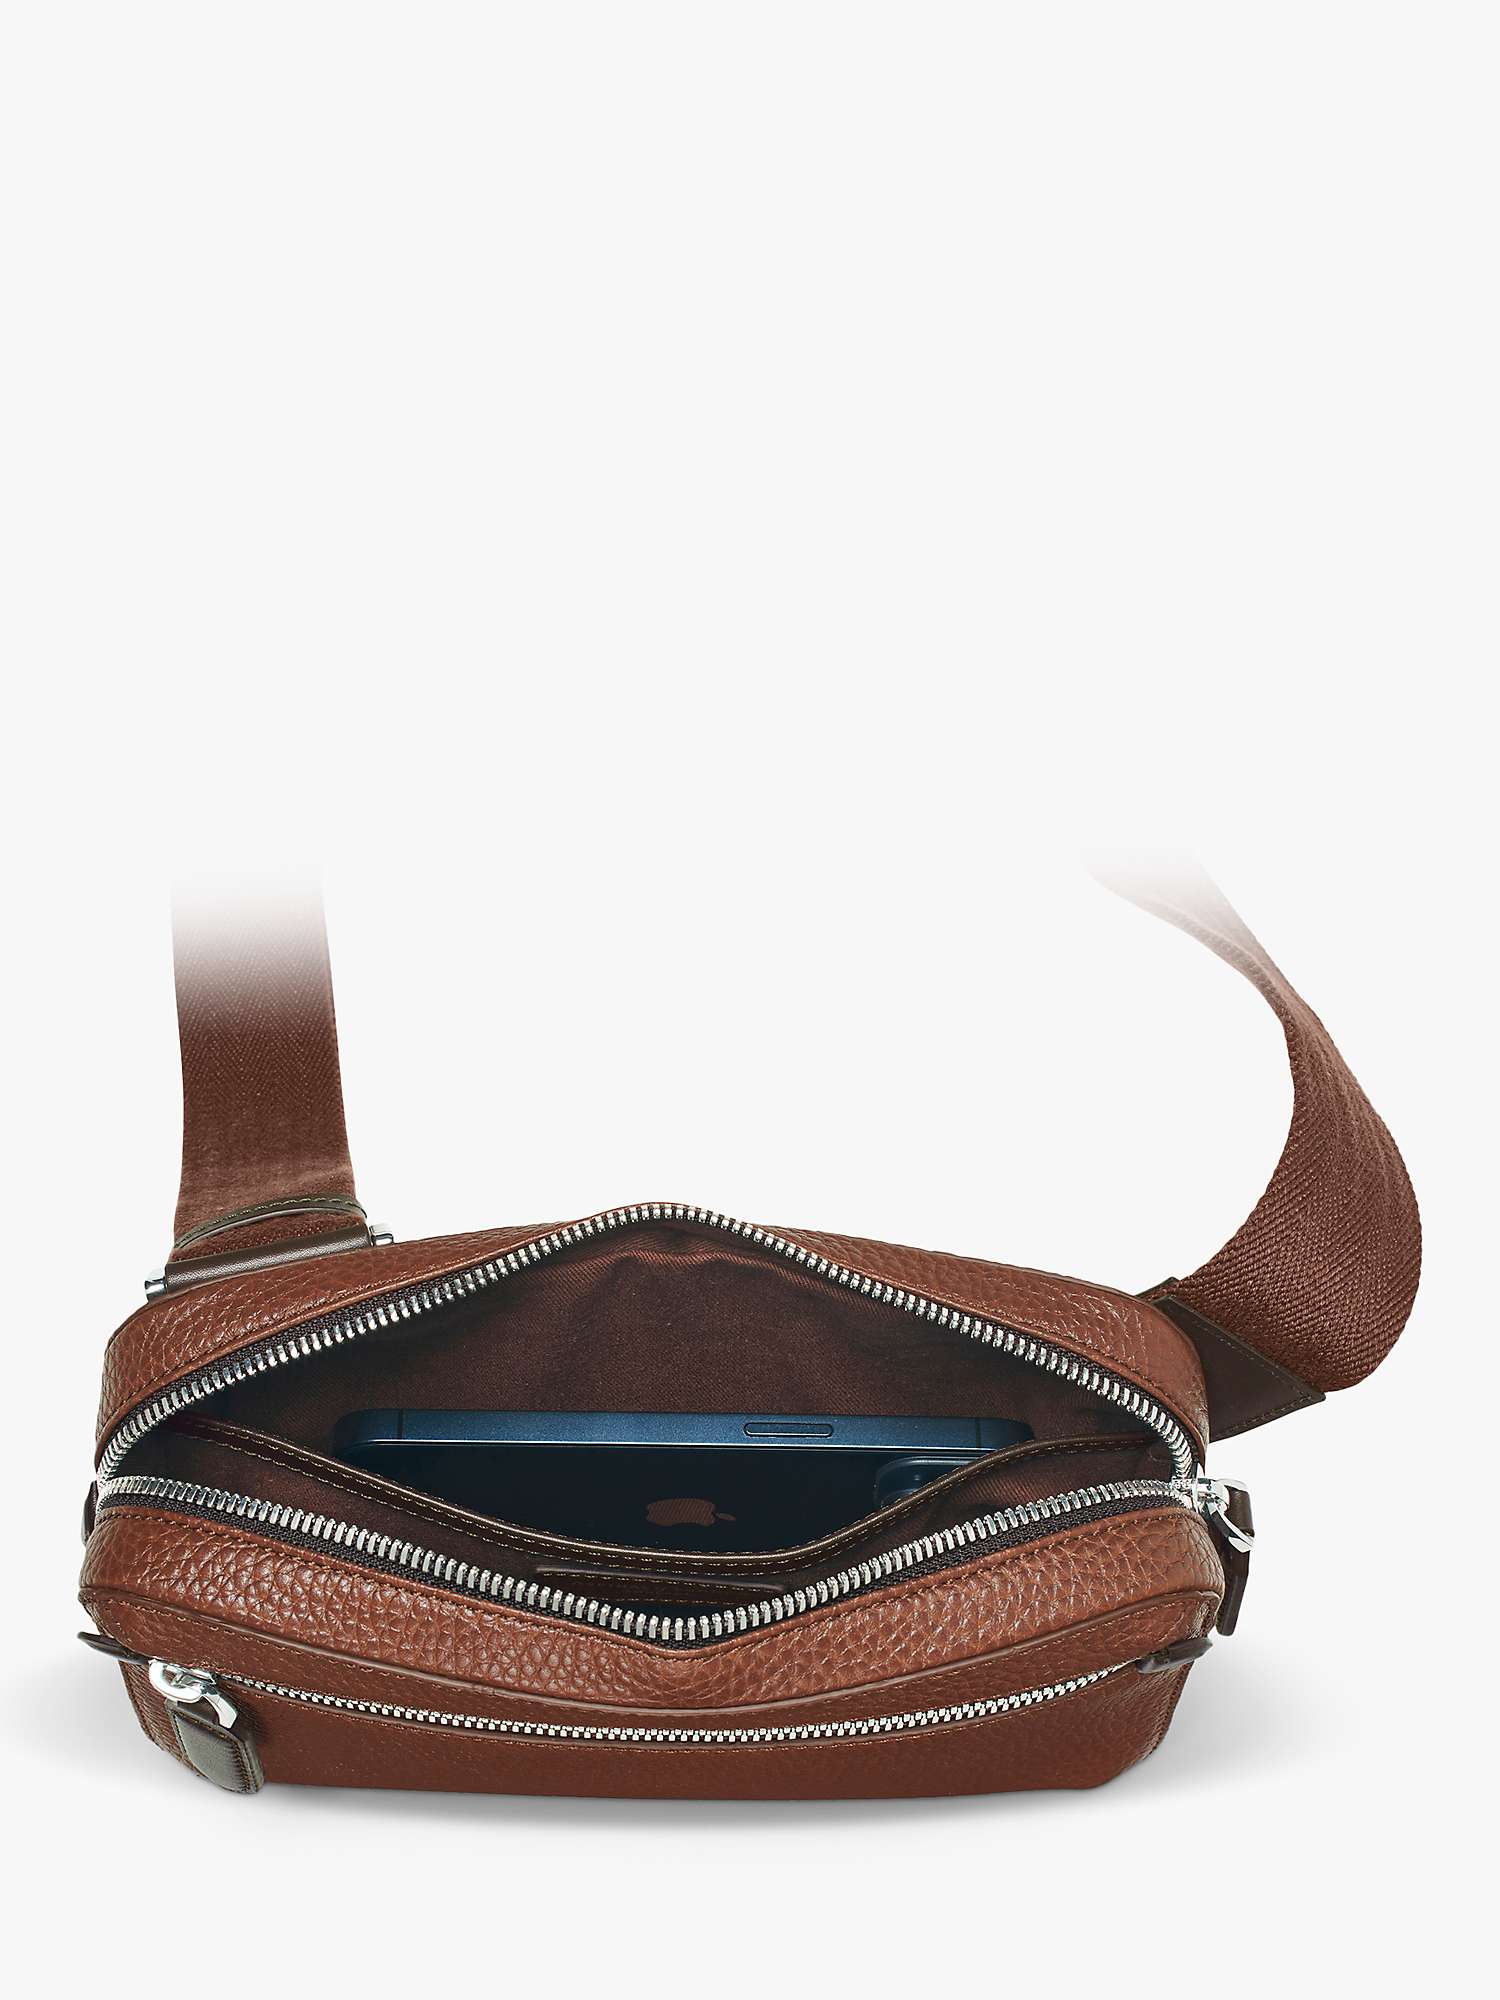 Buy Aspinal of London Compact Pebble Leather Reporter Bag, Tobacco Online at johnlewis.com